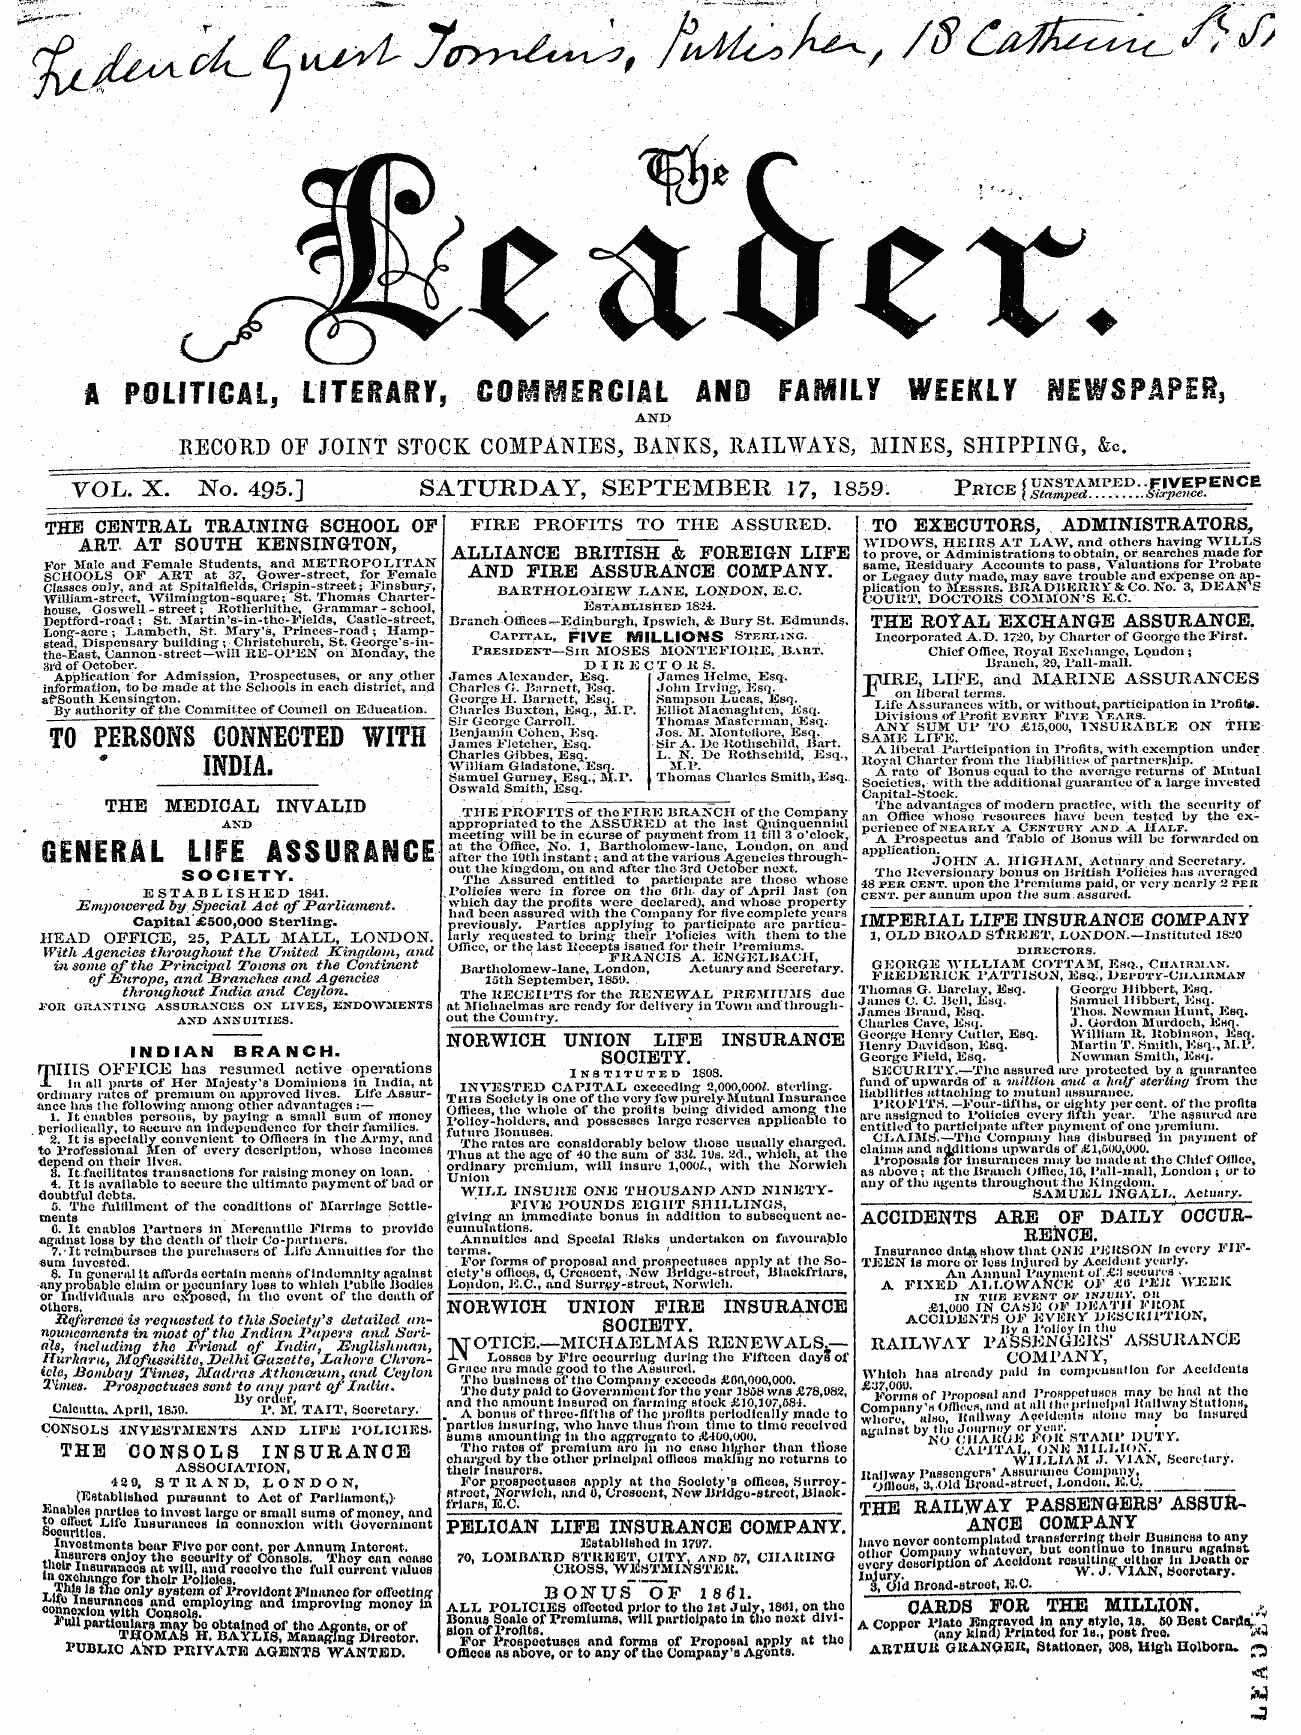 Leader (1850-1860): jS F Y, 2nd edition - Ad00108